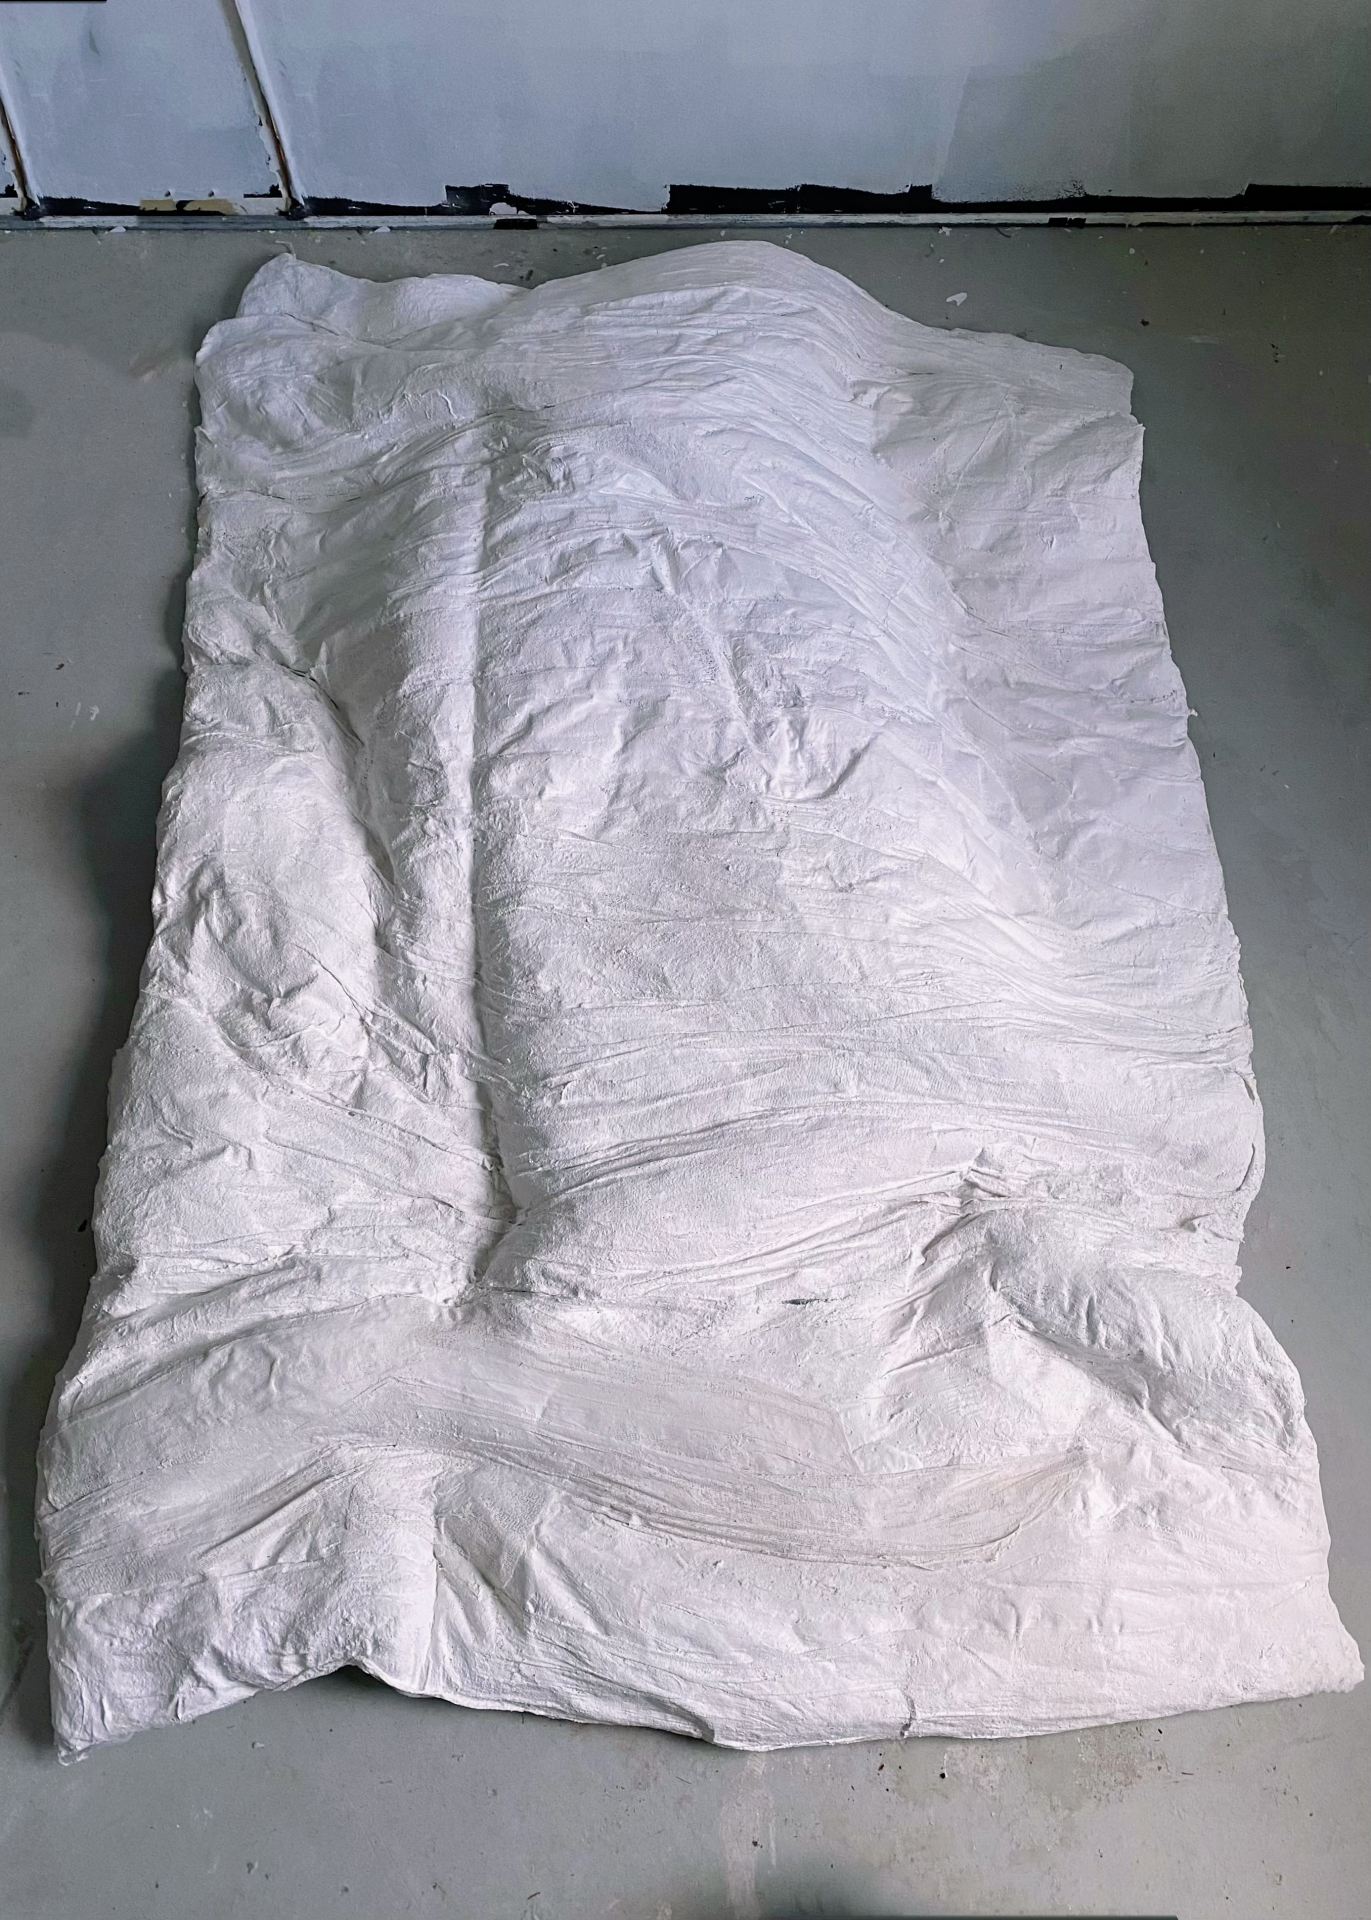 A piece of plaster cast to look like a duvet lying on a grey floor.